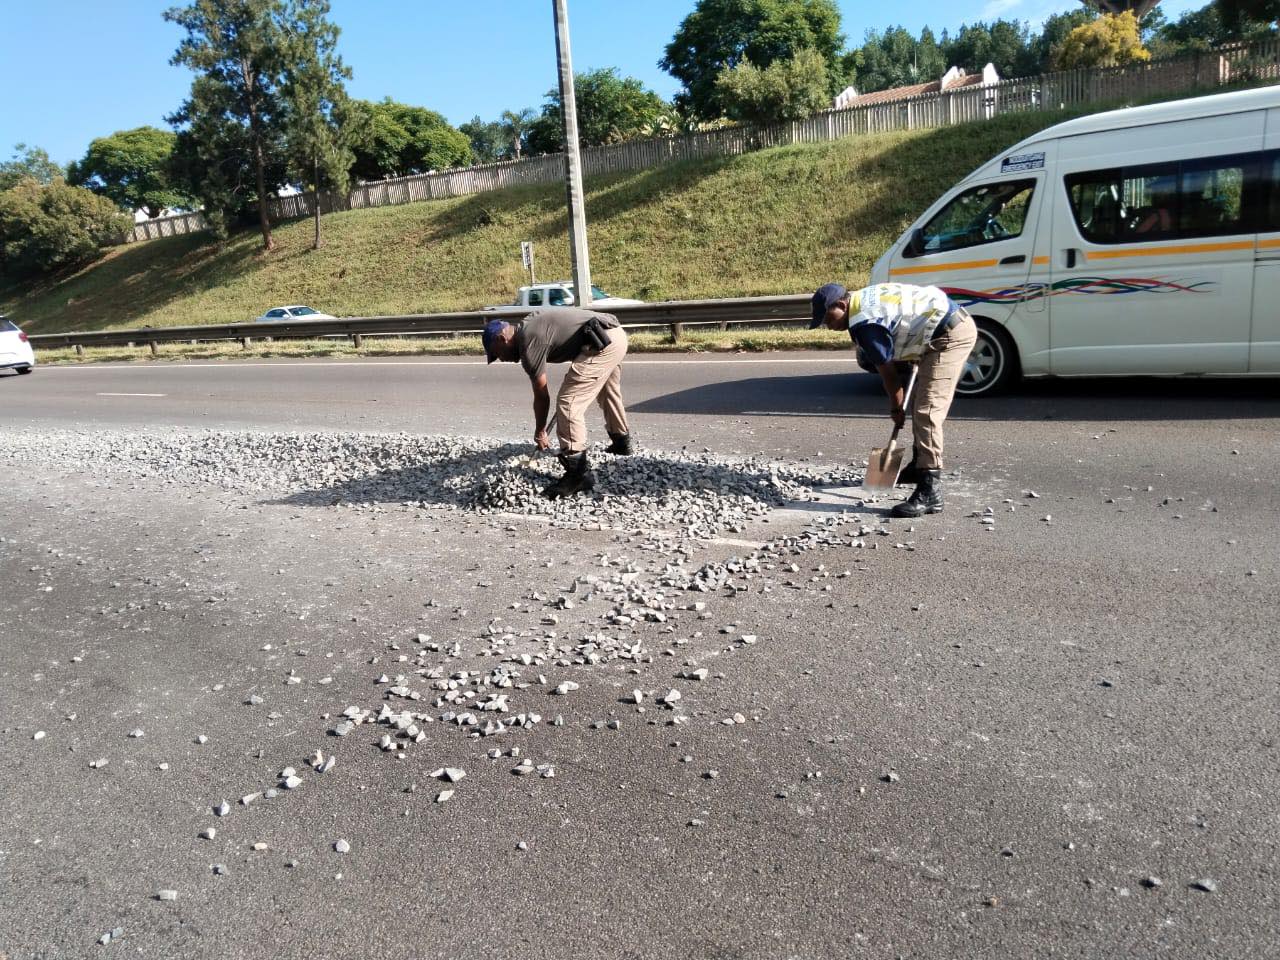 TMPD members assisting with cleaning the road on the N4 after a truck lost its load